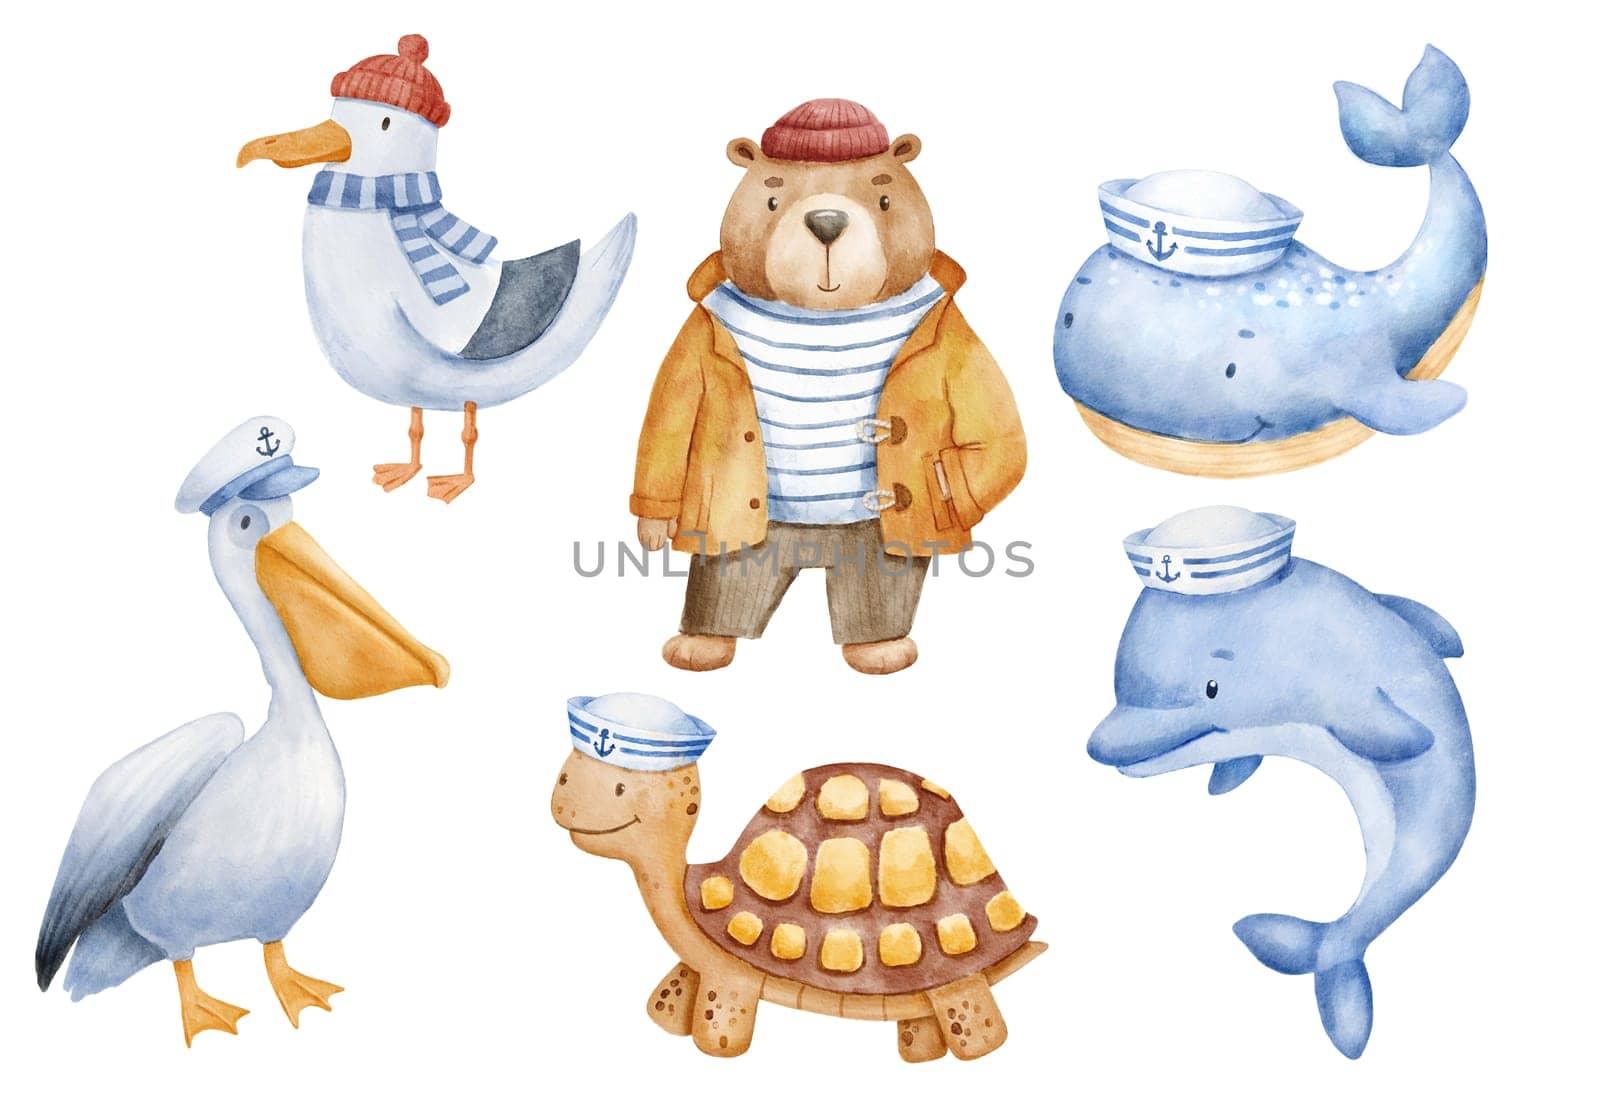 Cute sailor bear dressed in vest, hat and yellow fishing jacket. Pelican, dolphin and whale. Funny watercolor illustration of childish characters set isolated on white background by ElenaPlatova